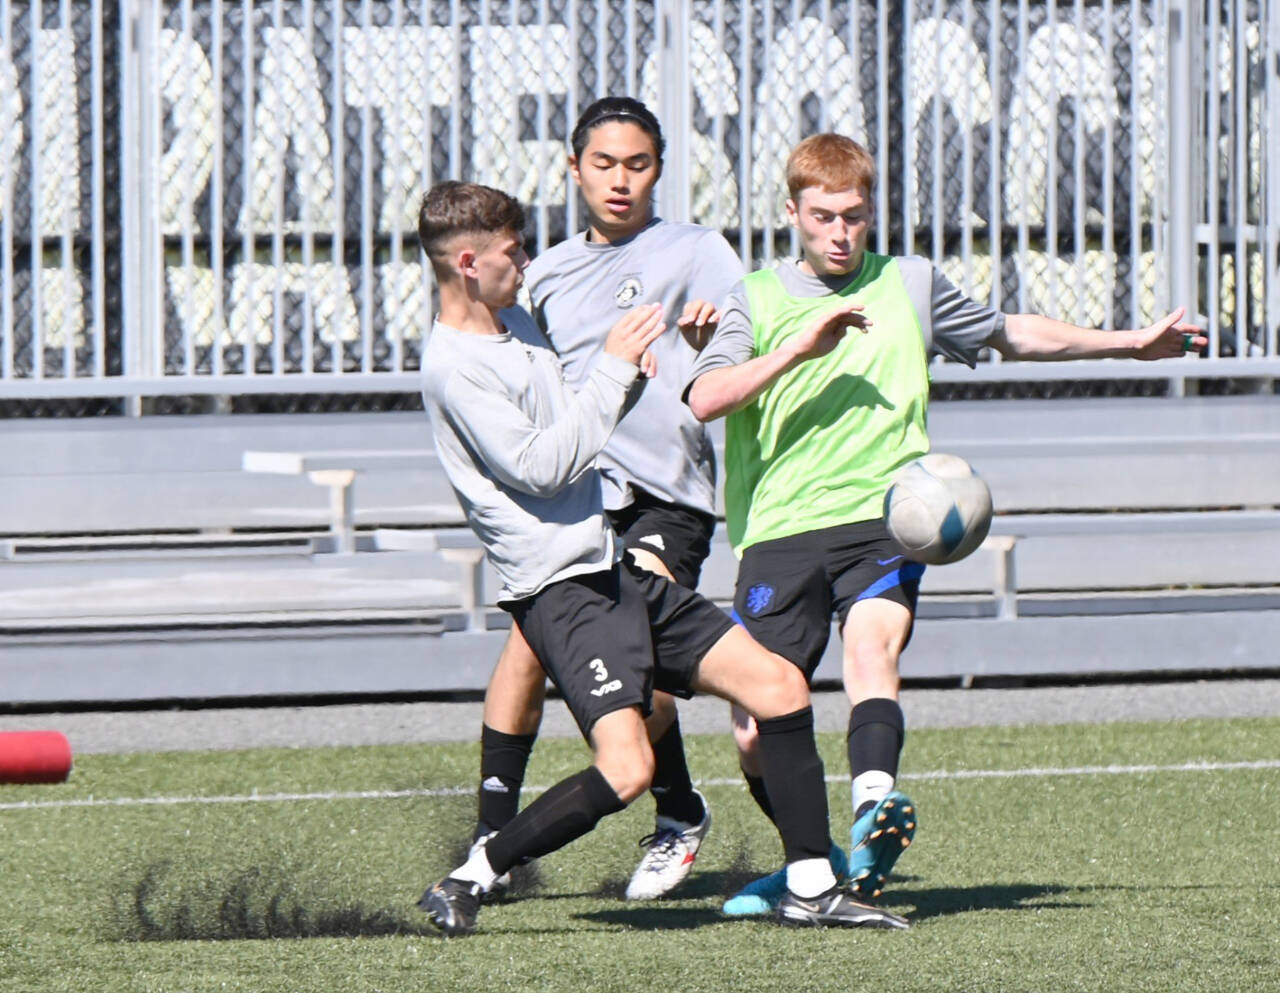 The Peninsula College men’s team also began practice Monday. From left, Alfie Tucker, Shu Kato and Pipeijn Van Der Ende fight for a loose ball at Wally Sigmar Field in Port Angeles. (Photos courtesy of Peninsula College)